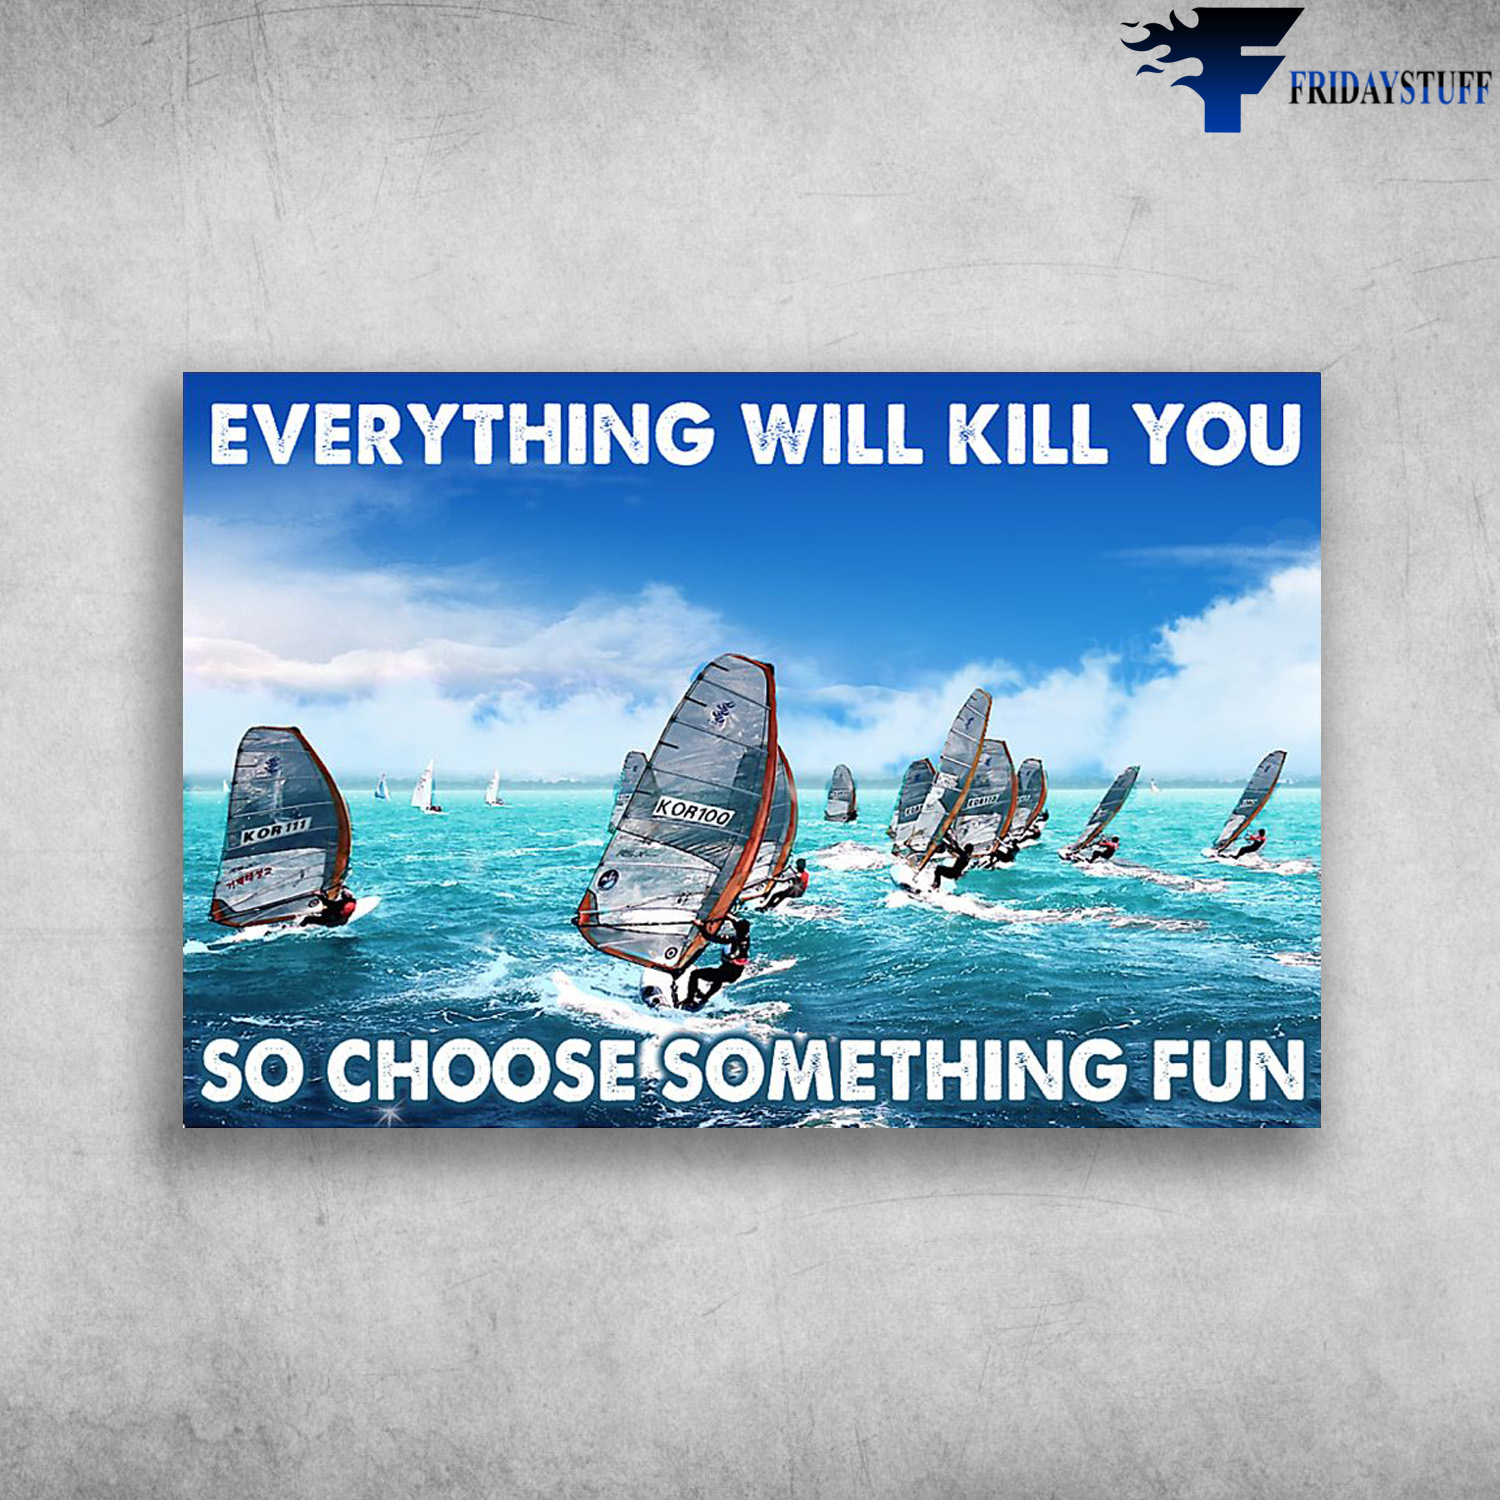 Windsurfing On The Ocean - Everything Will Kill You So Choose Something Fun